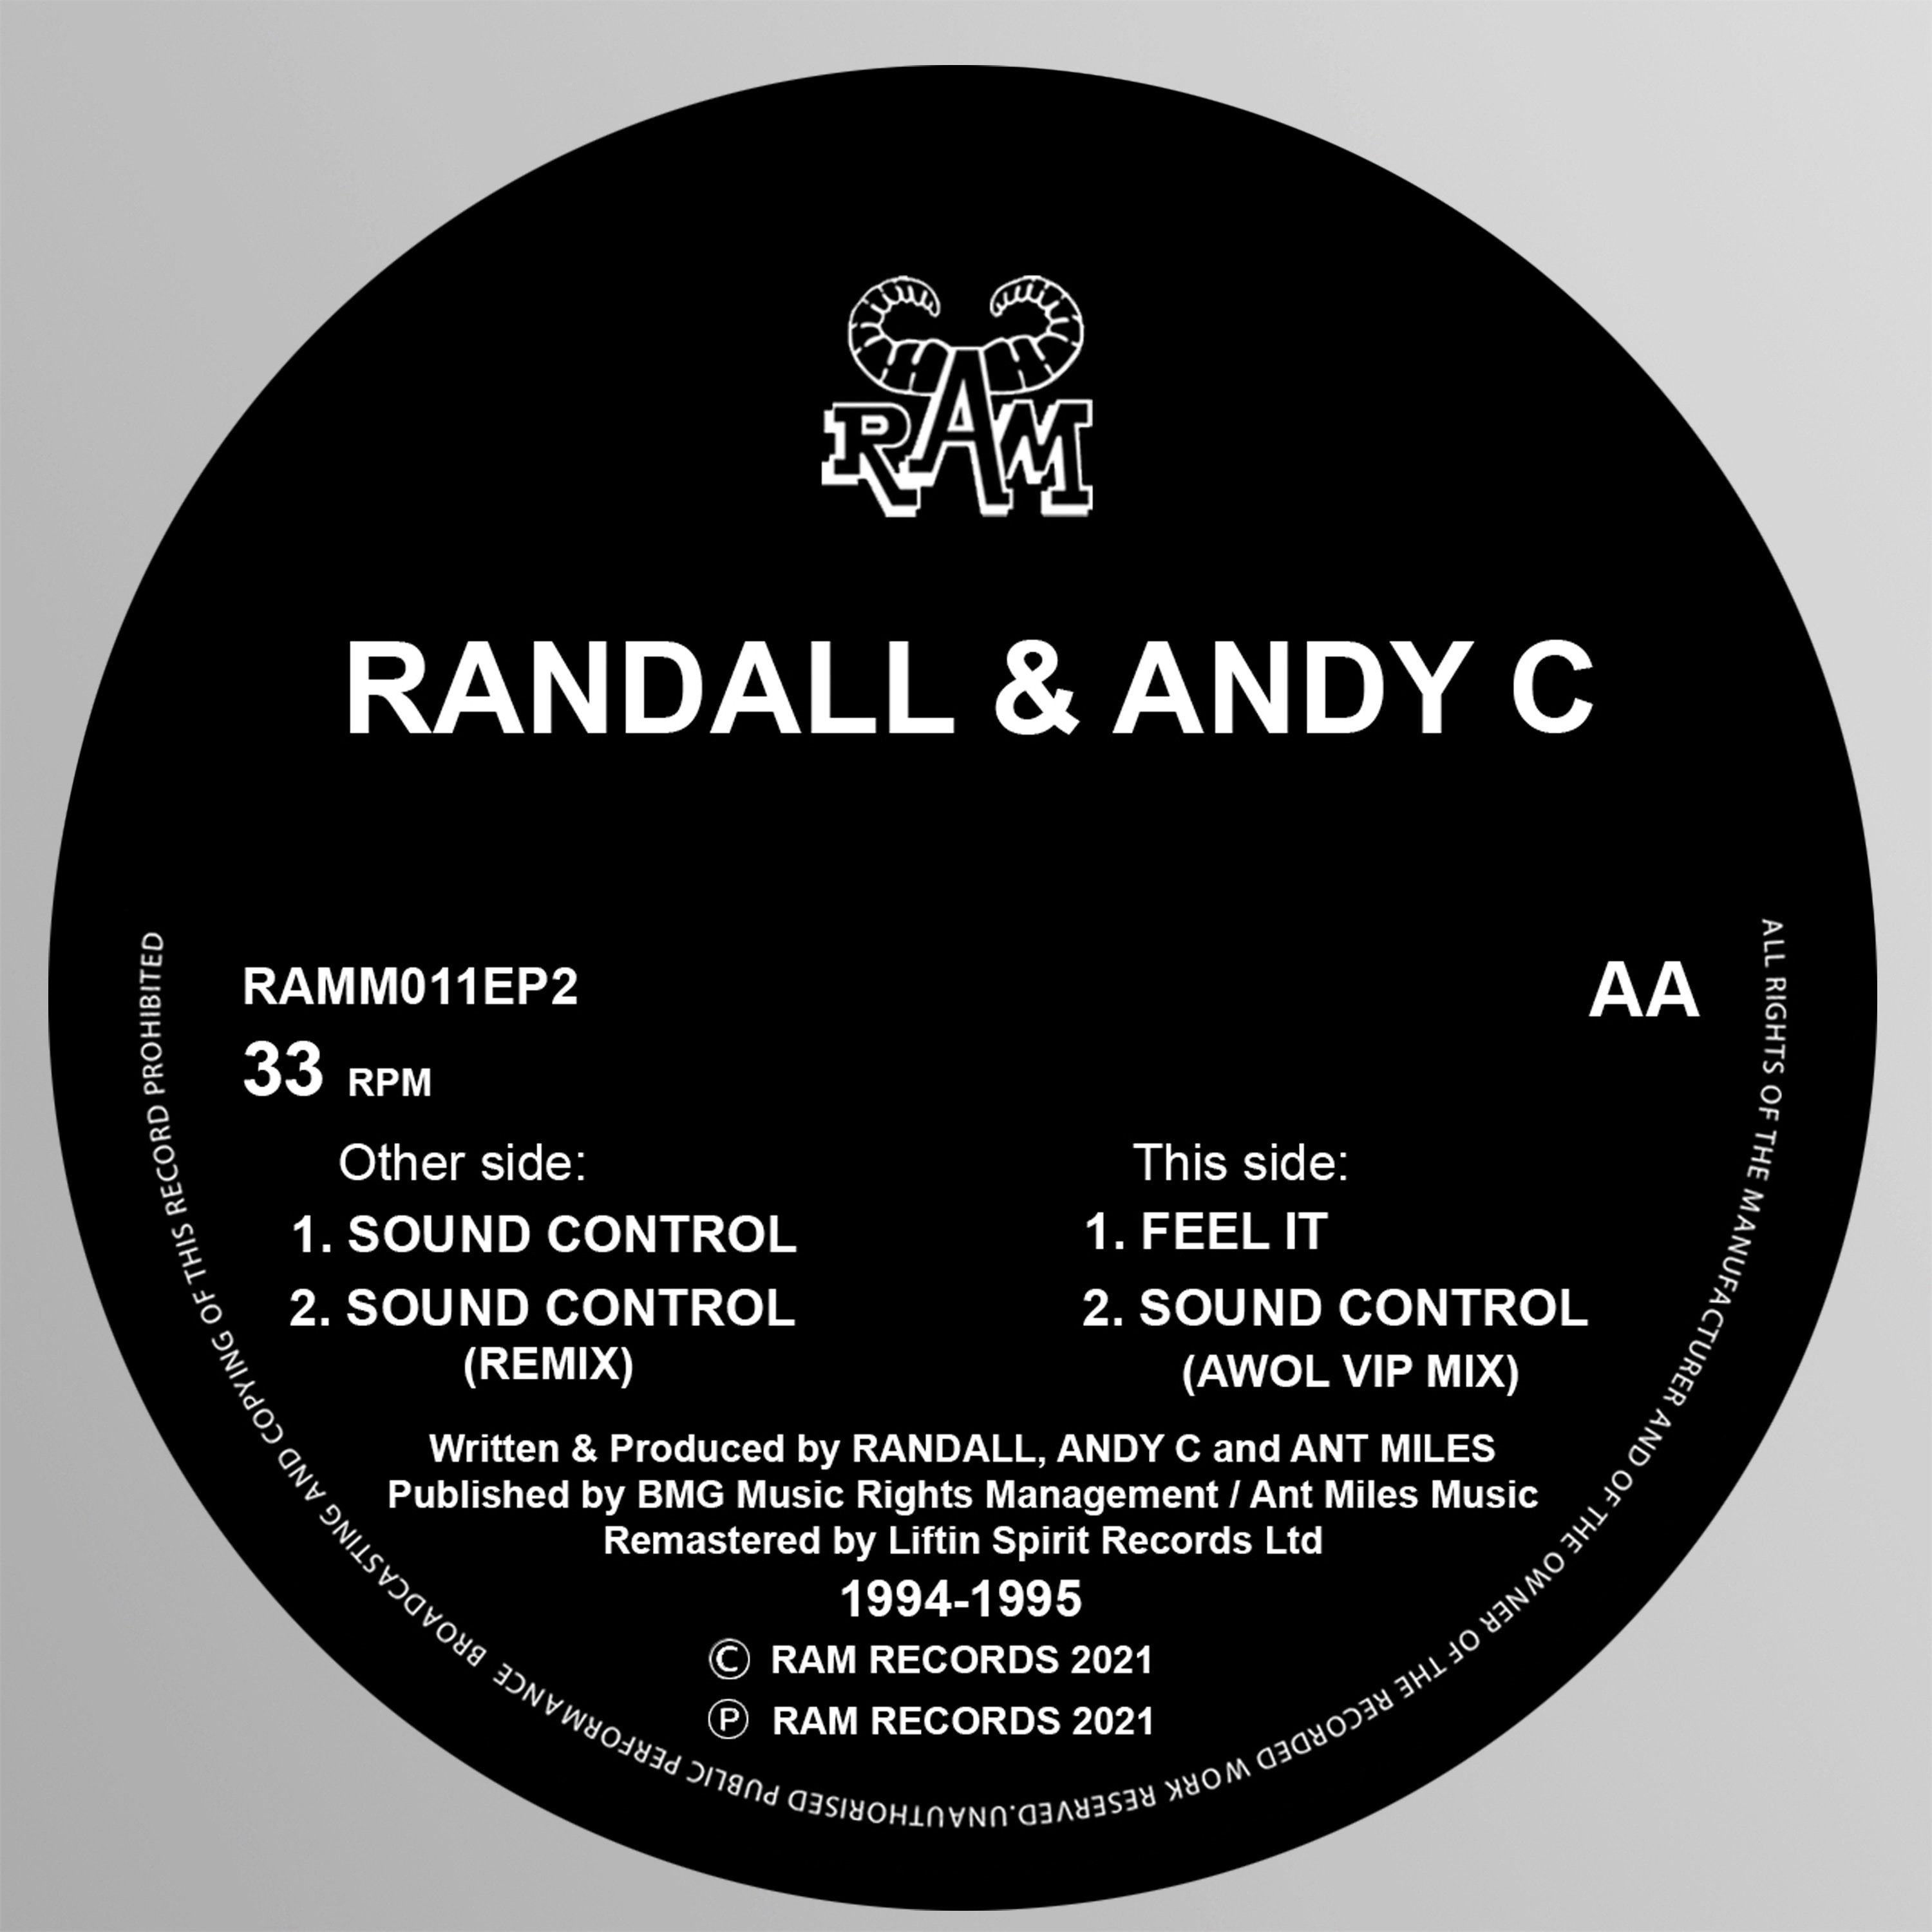 Randall & Andy C - Sound Control / Feel it (1994/95) – Horizons Music